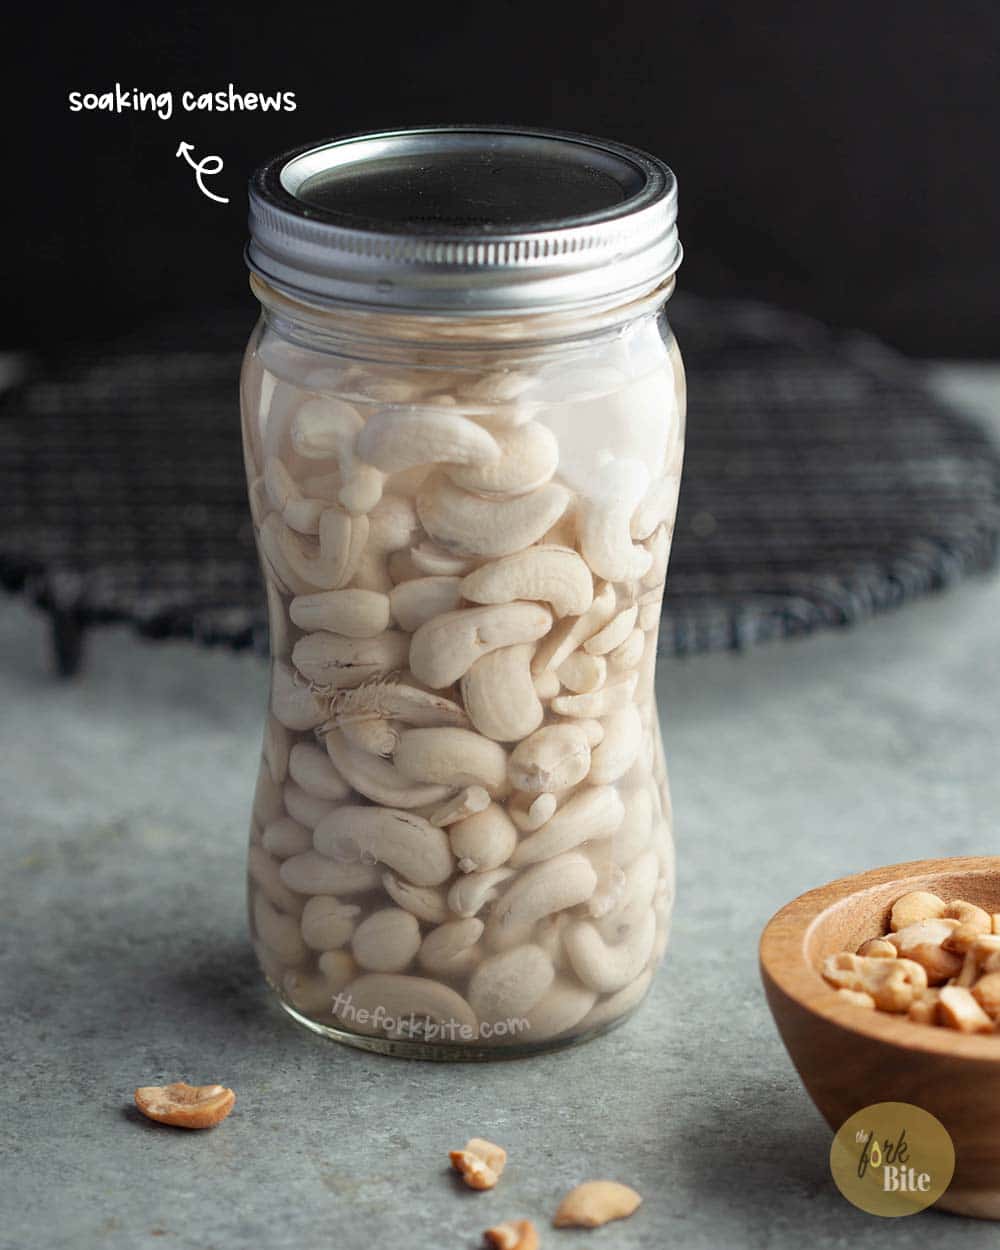 Soak cashews for at least 5 to 6 hours (preferably overnight). If you soak them longer, your cashew cream will be creamier.